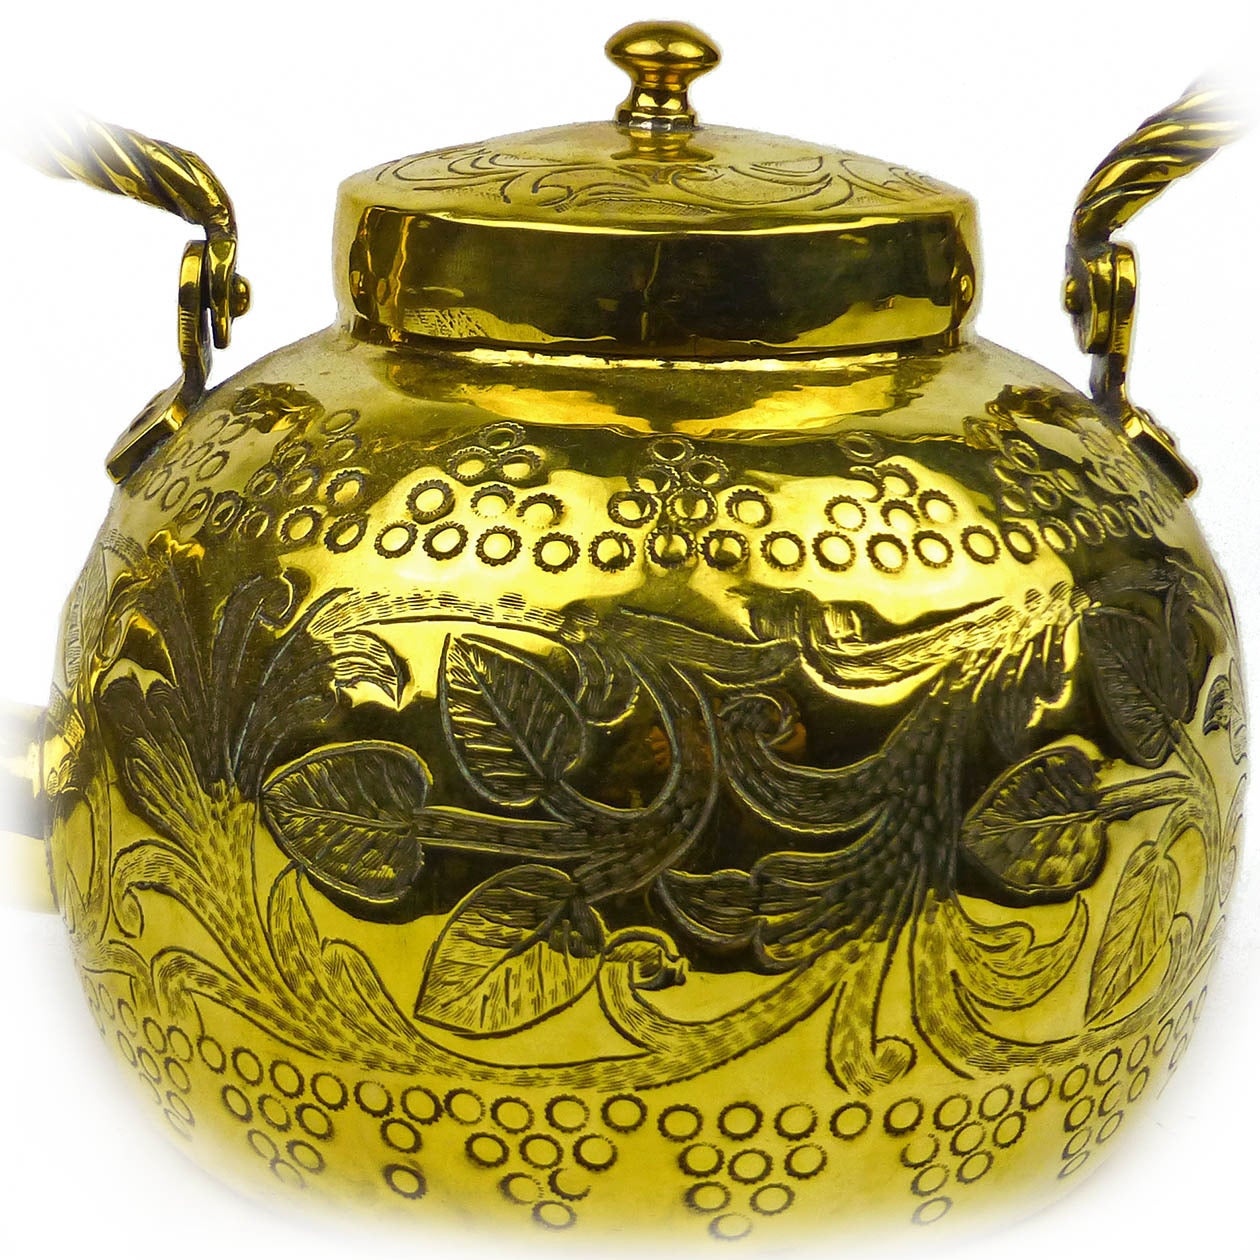 Arts and Crafts English brass tea kettle, circa 1890. With twisted swing handle. Beautifully decorated body. Measures: Height: 8 3/4″, diameter 5 1/4″.